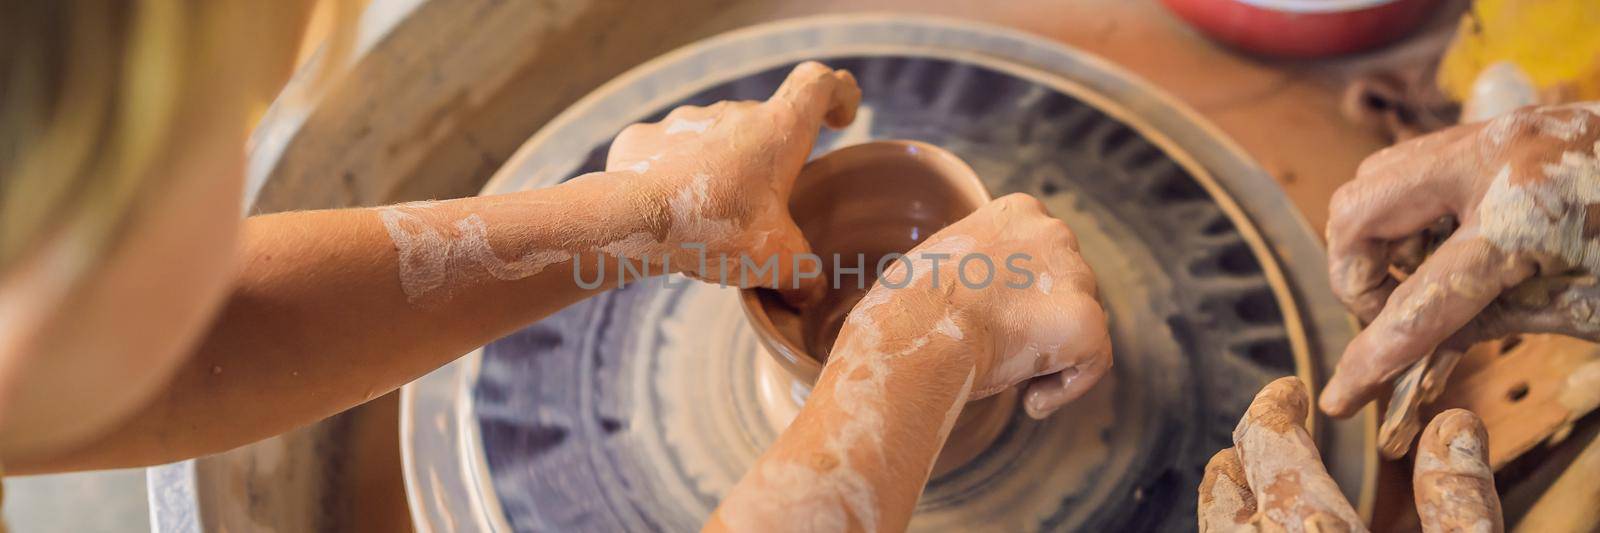 Father and son doing ceramic pot in pottery workshop BANNER, LONG FORMAT by galitskaya